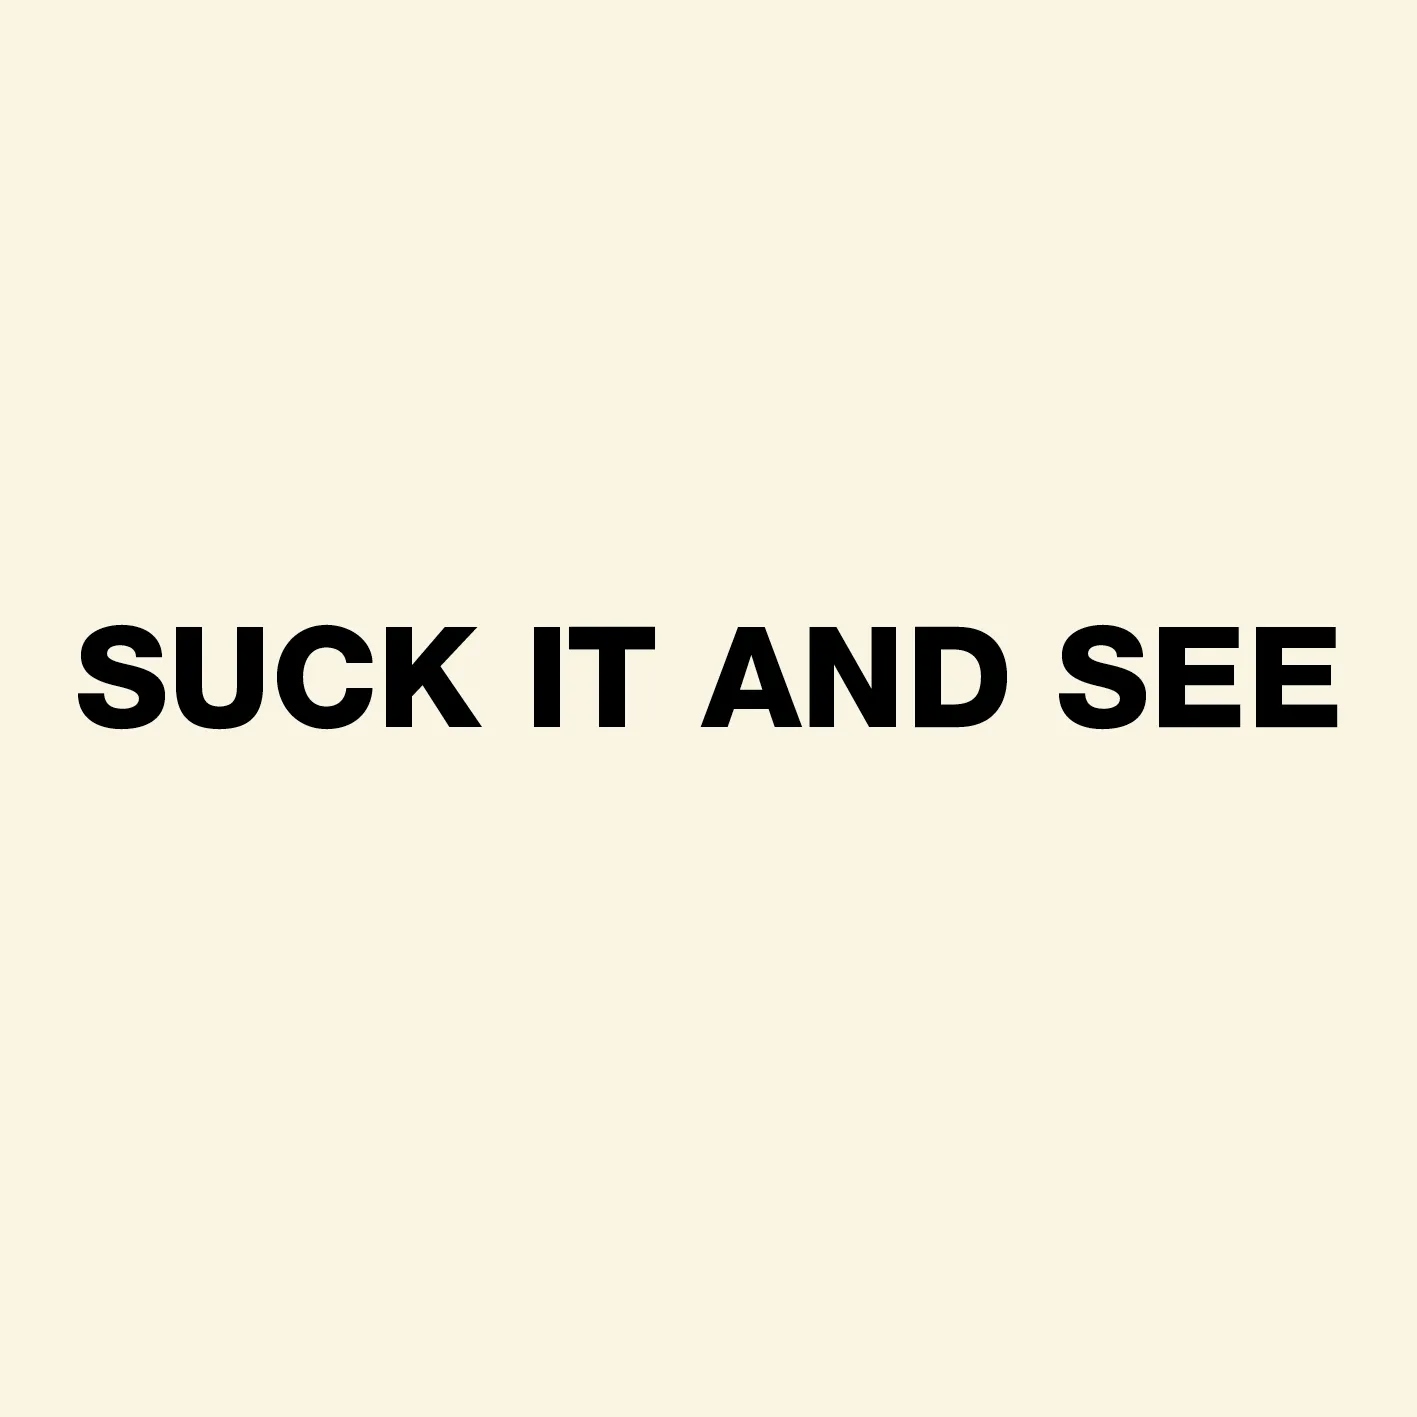 Album artwork for Suck It and See by Arctic Monkeys